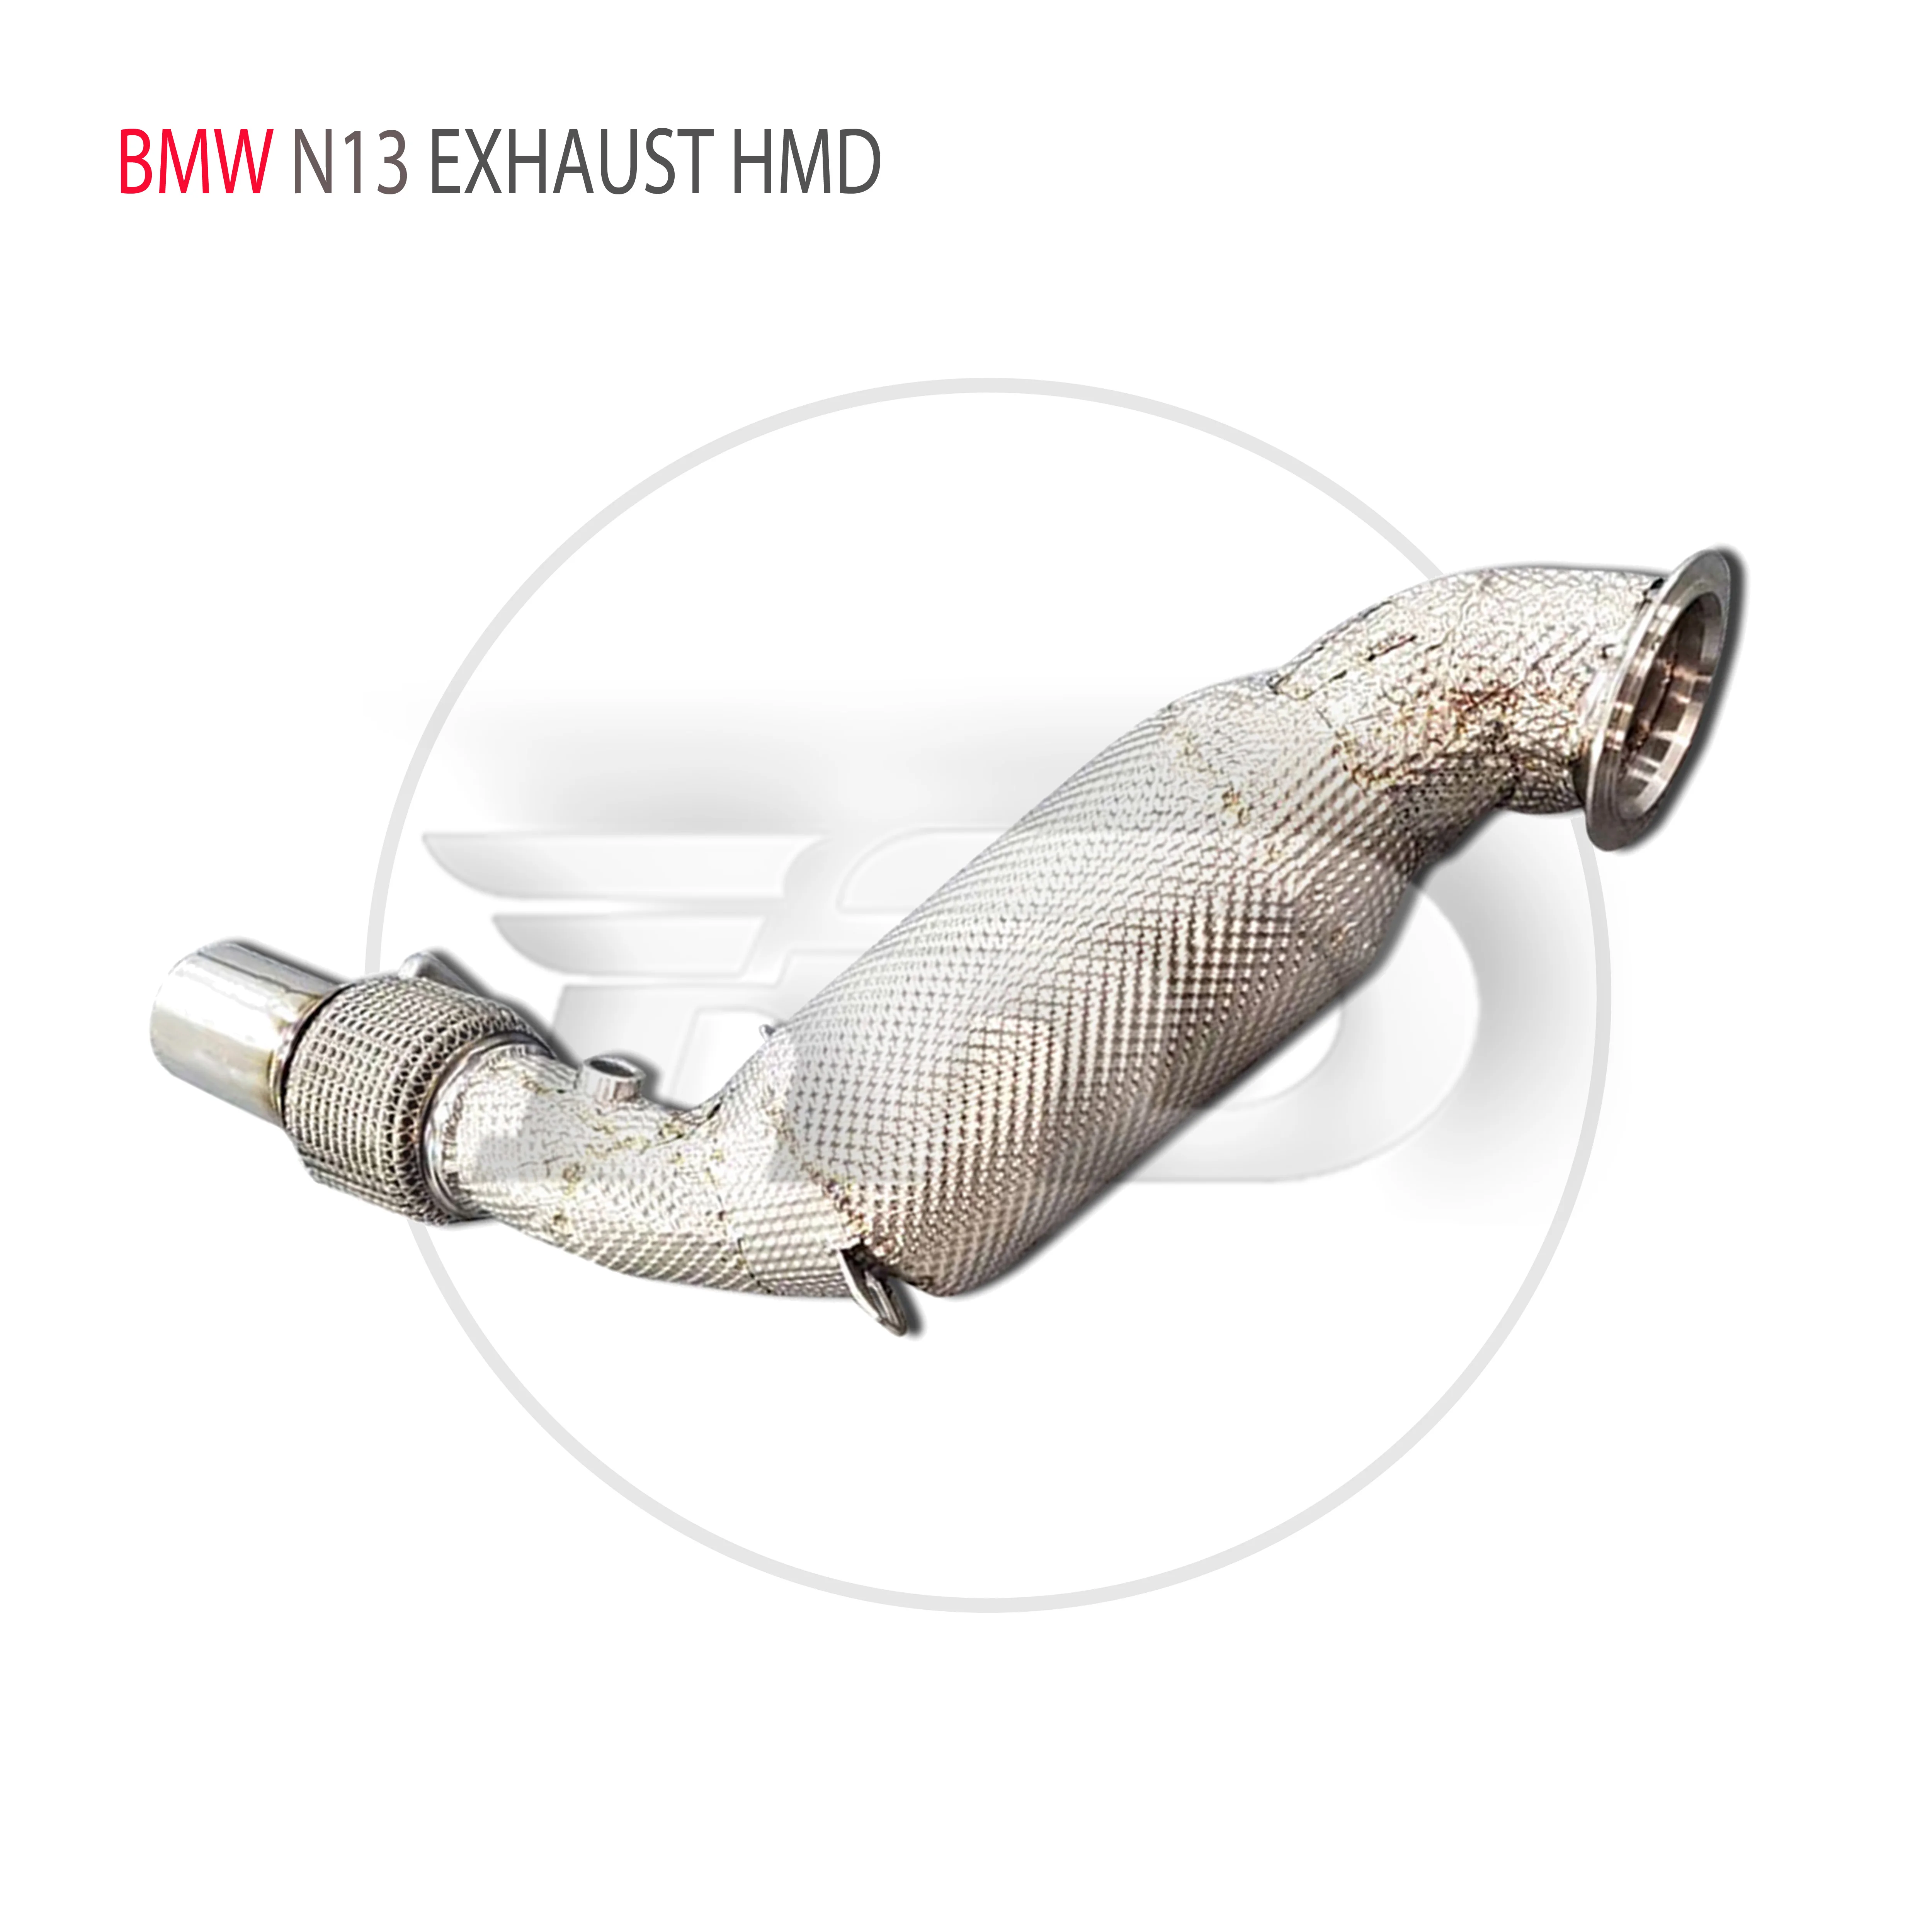 

HMD Stainless Steel Exhaust System High Flow Performance Downpipe for BMW 116i 118i 120i N13 1.6T Car Accessories